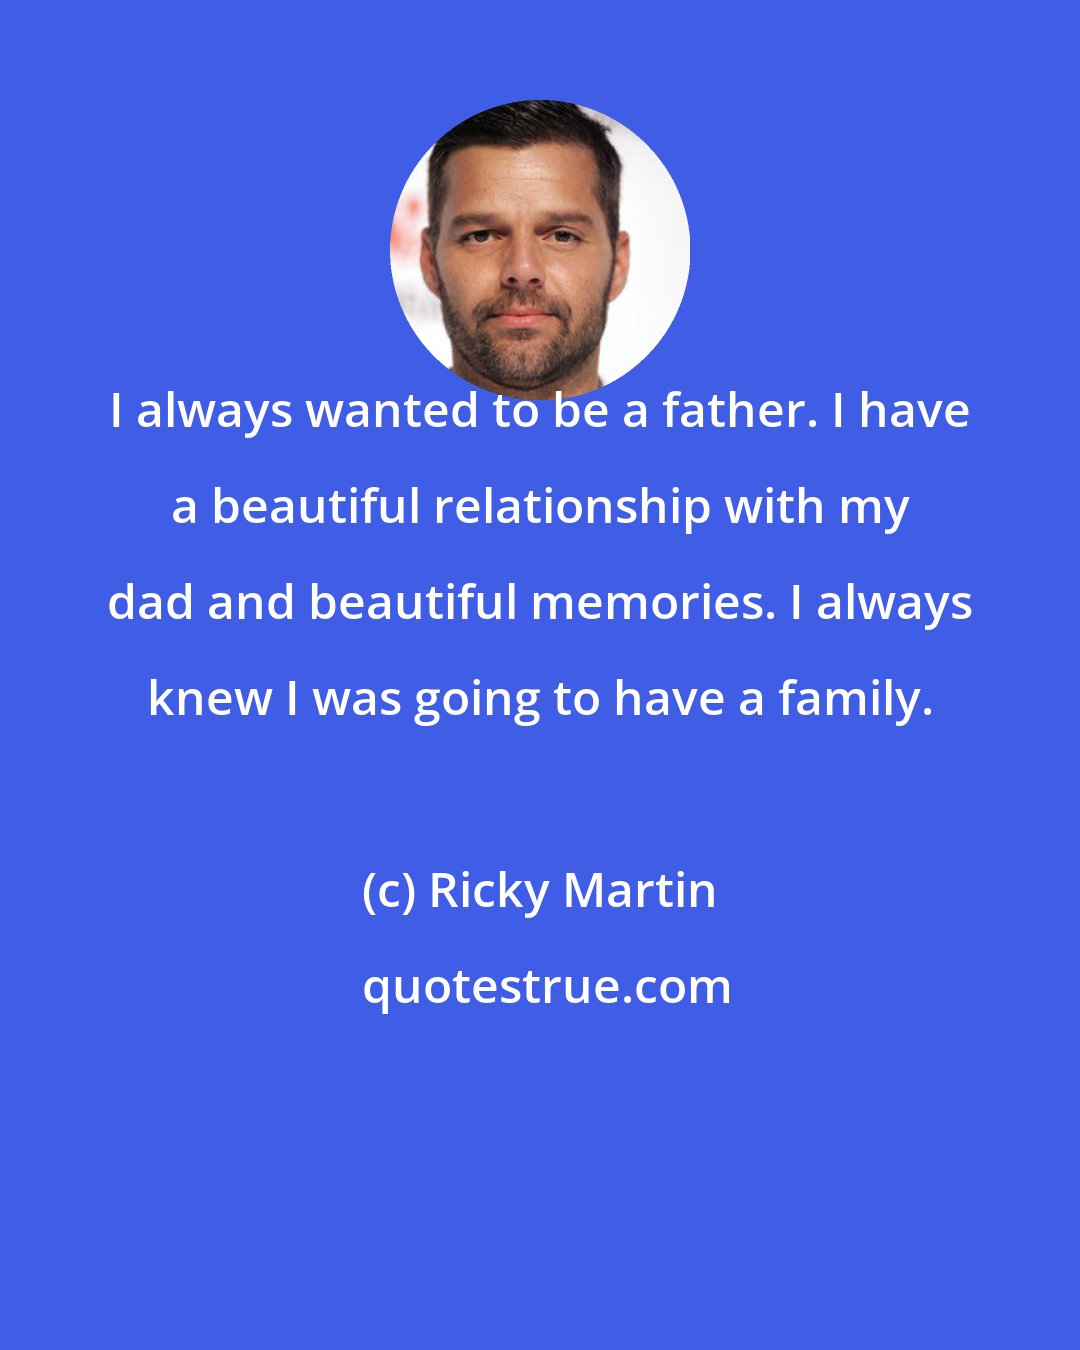 Ricky Martin: I always wanted to be a father. I have a beautiful relationship with my dad and beautiful memories. I always knew I was going to have a family.